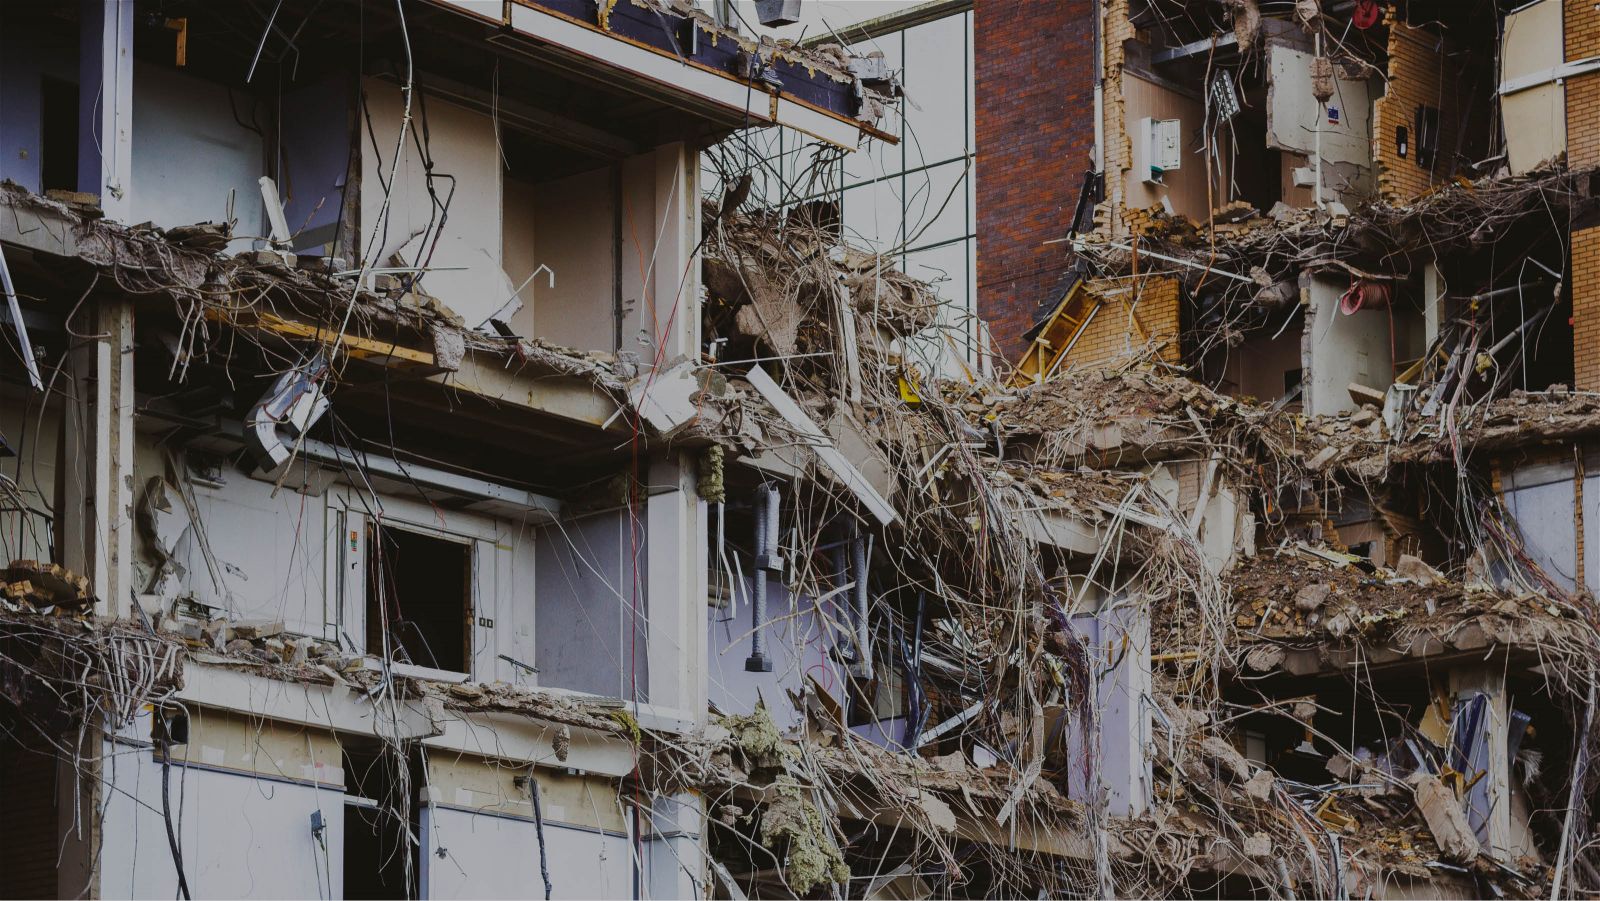 Partially demolished buildings with their interiors exposed to the elements.